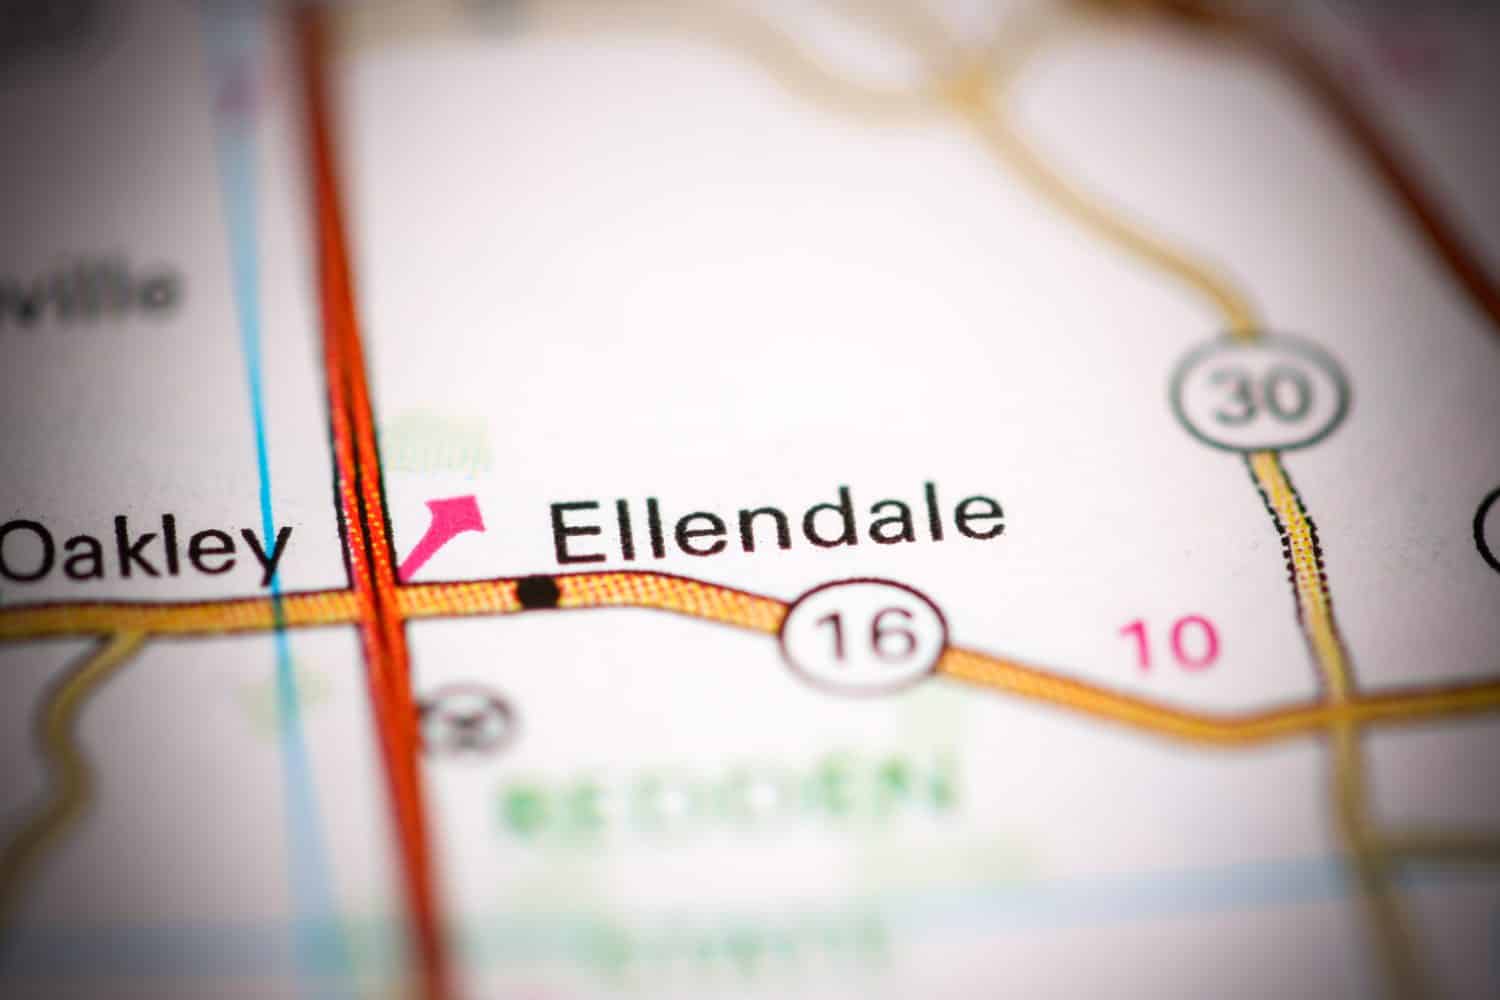 Ellendale. Delaware. USA on a geography map